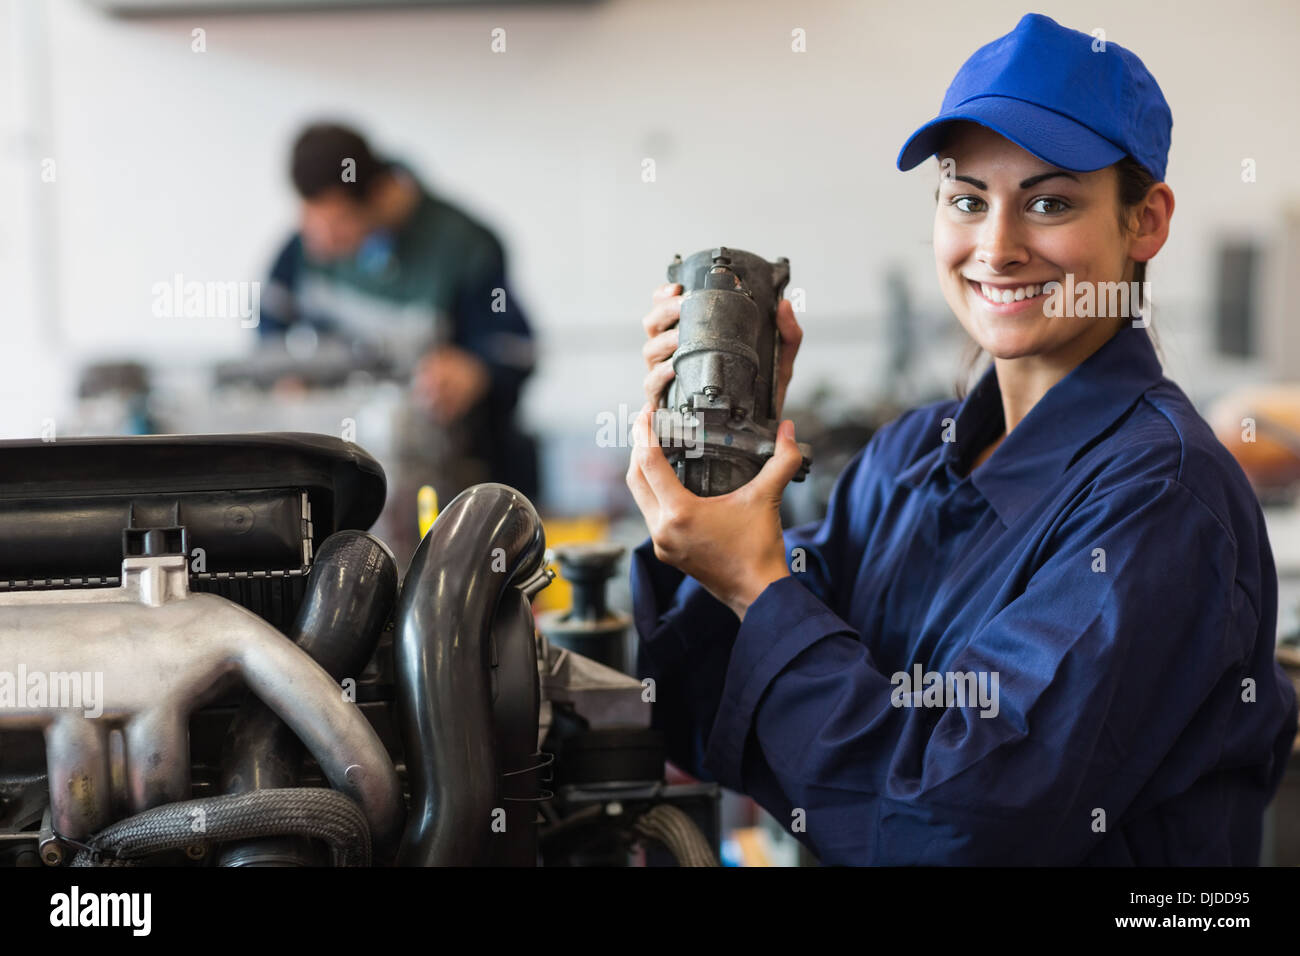 Happy trainee showing part of a machine Stock Photo